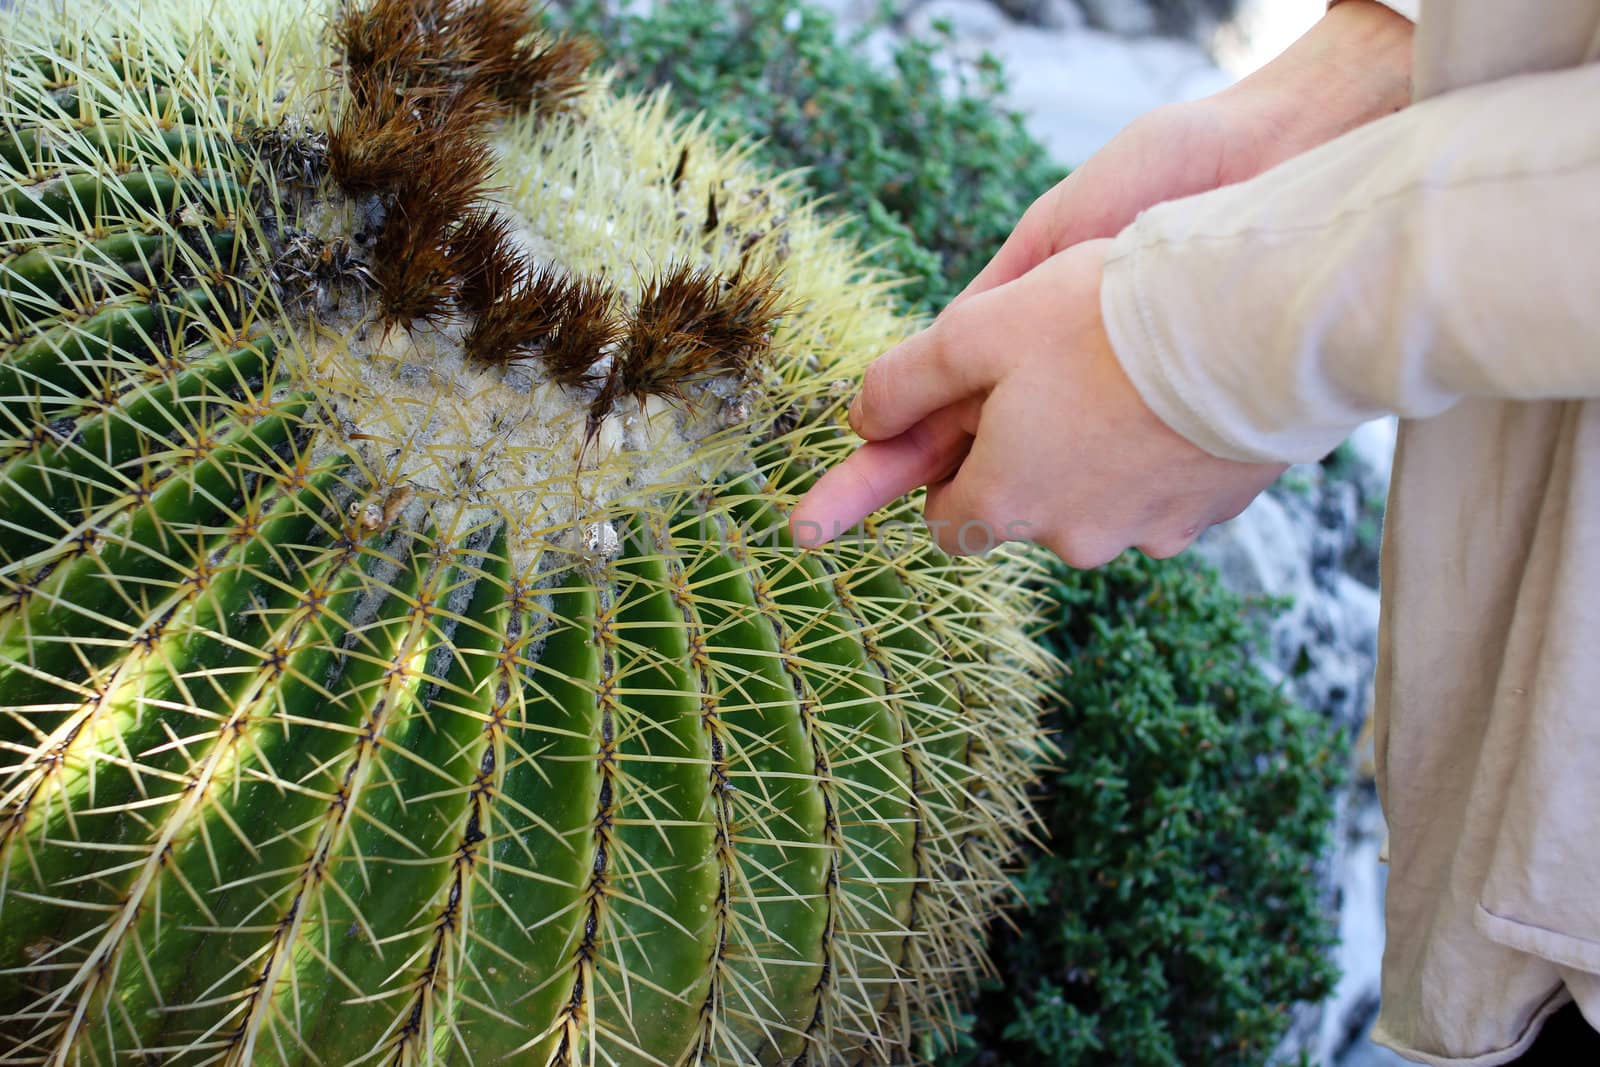 Woman hurt herself on a thorn from a cactus and is holding her hand